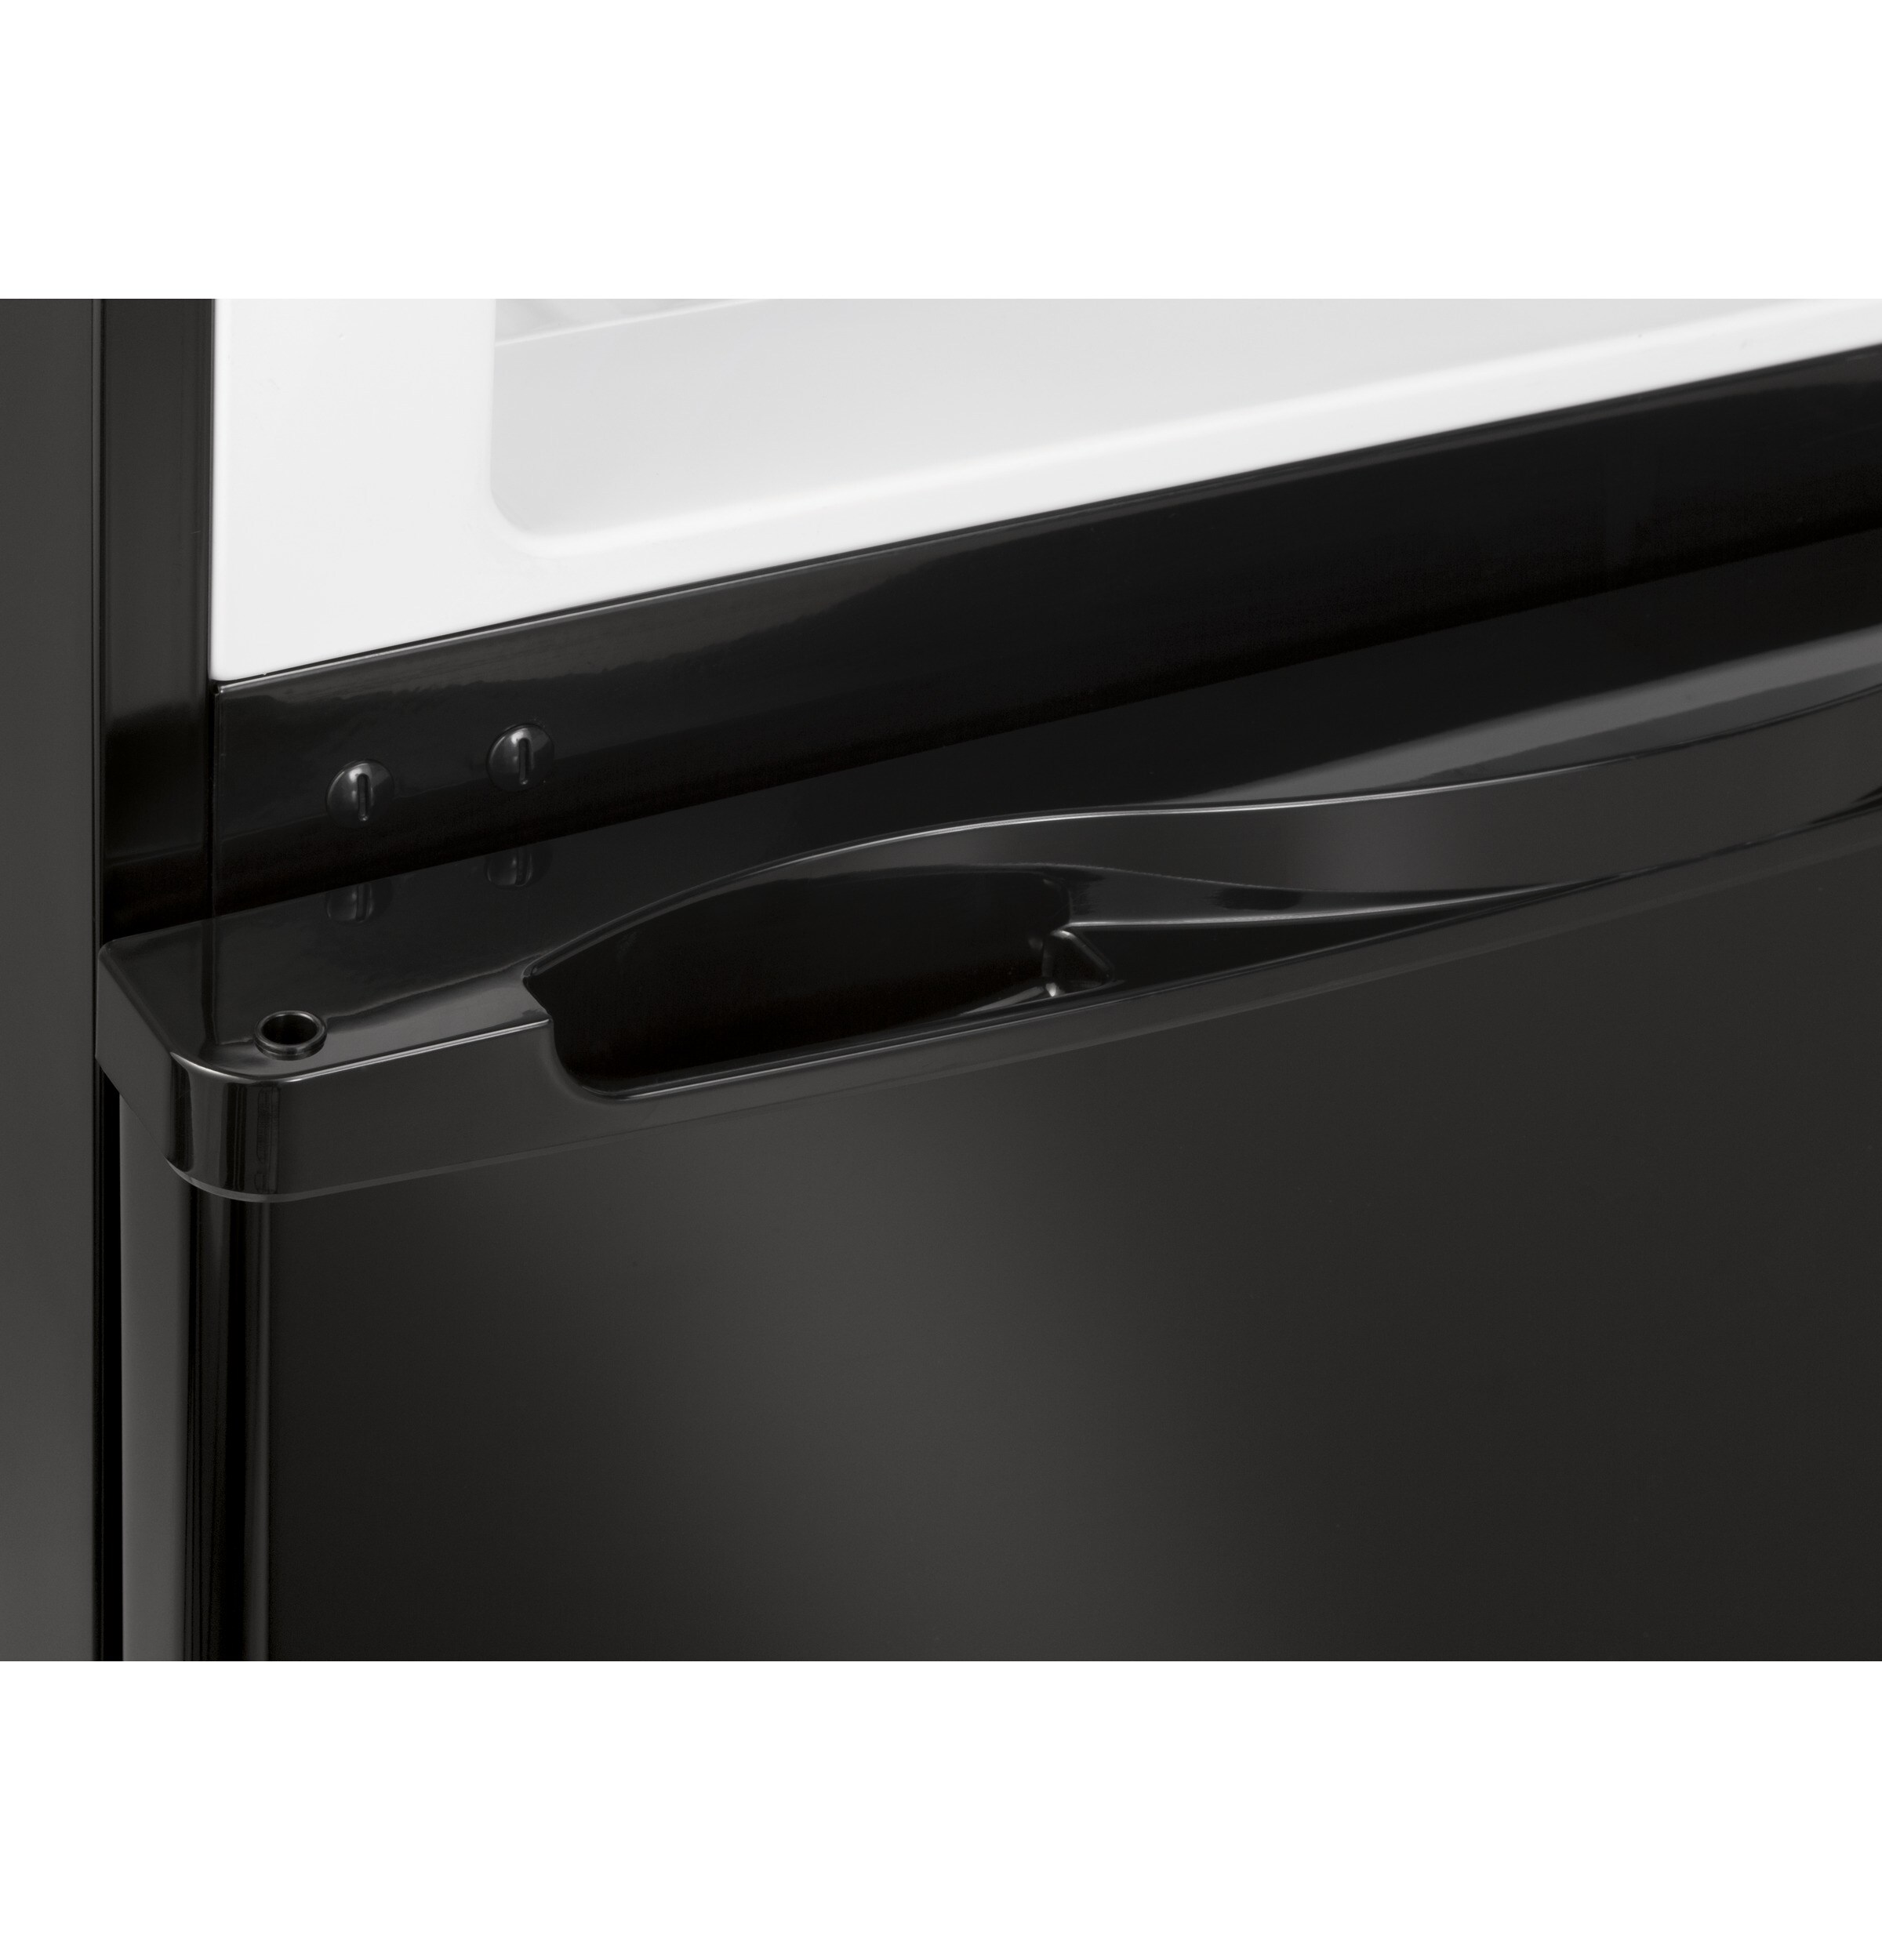 Haier 9.8-cu ft Counter-depth Top-Freezer Refrigerator (Black) in the ...